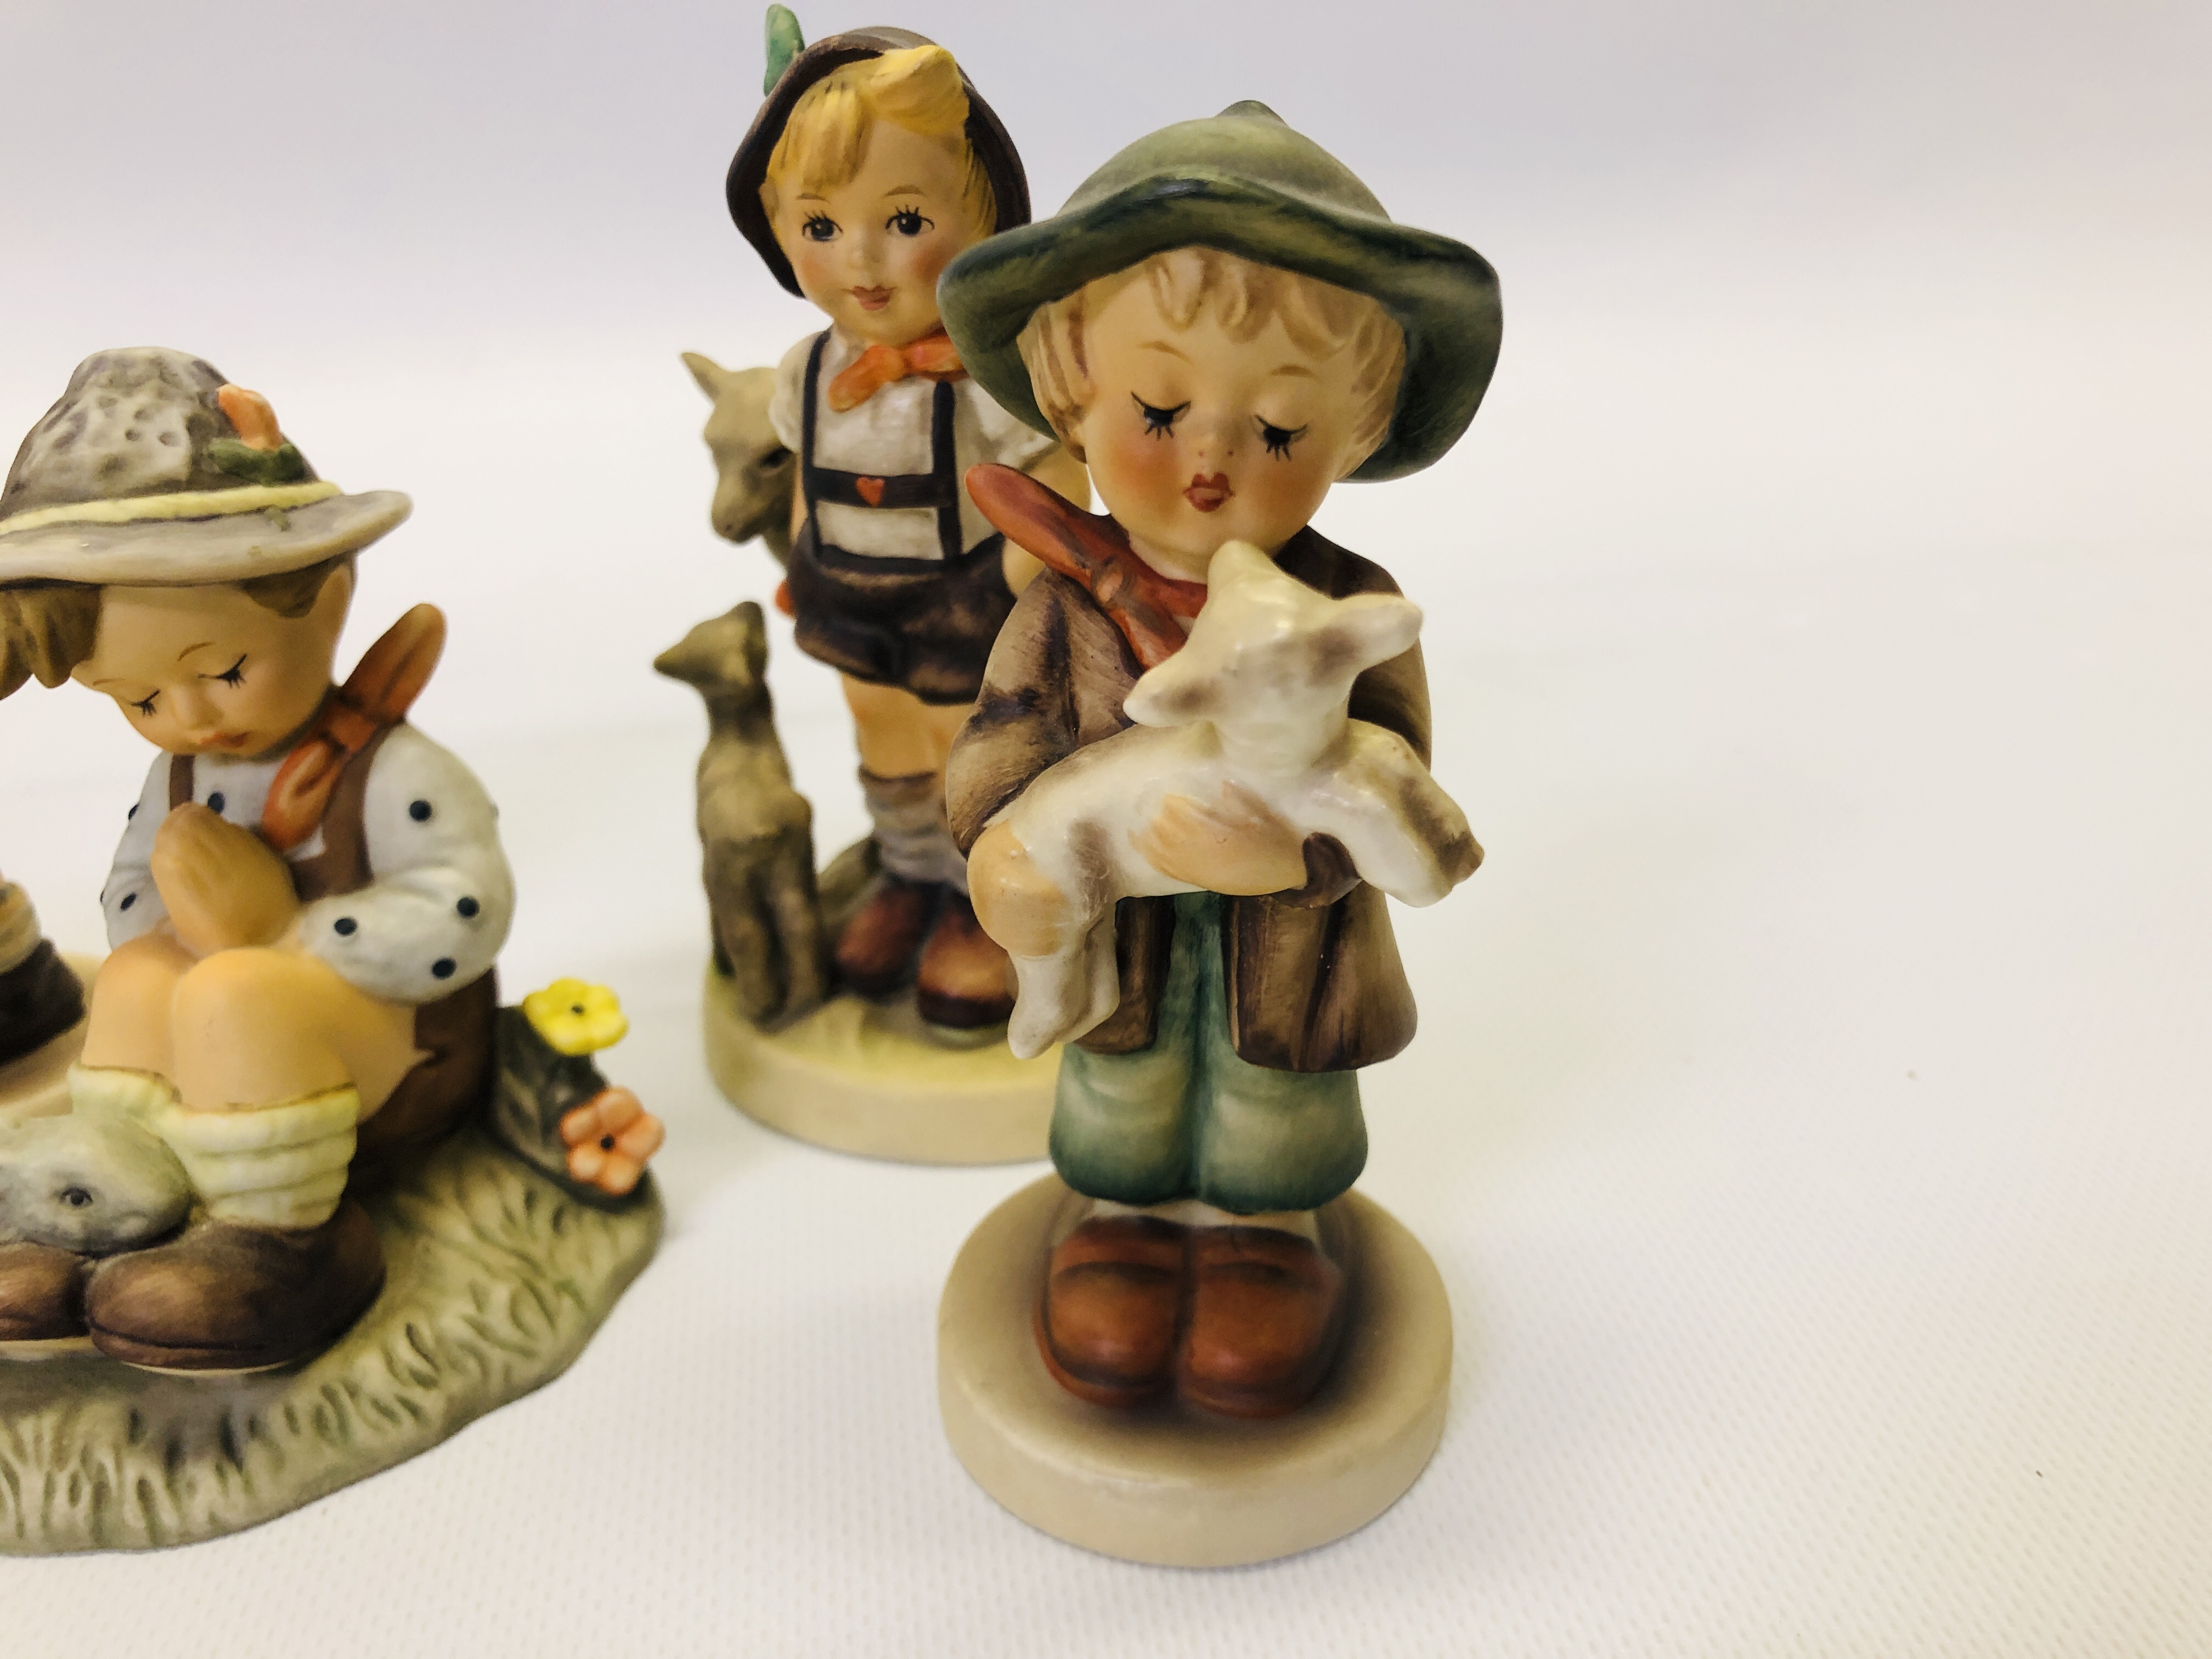 A GROUP OF 6 ASSORTED "GOEBEL" CABINET ORNAMENTS T O INCLUDE "LITTLE HELPER" NATURES PRAYER BH55 - Image 7 of 10